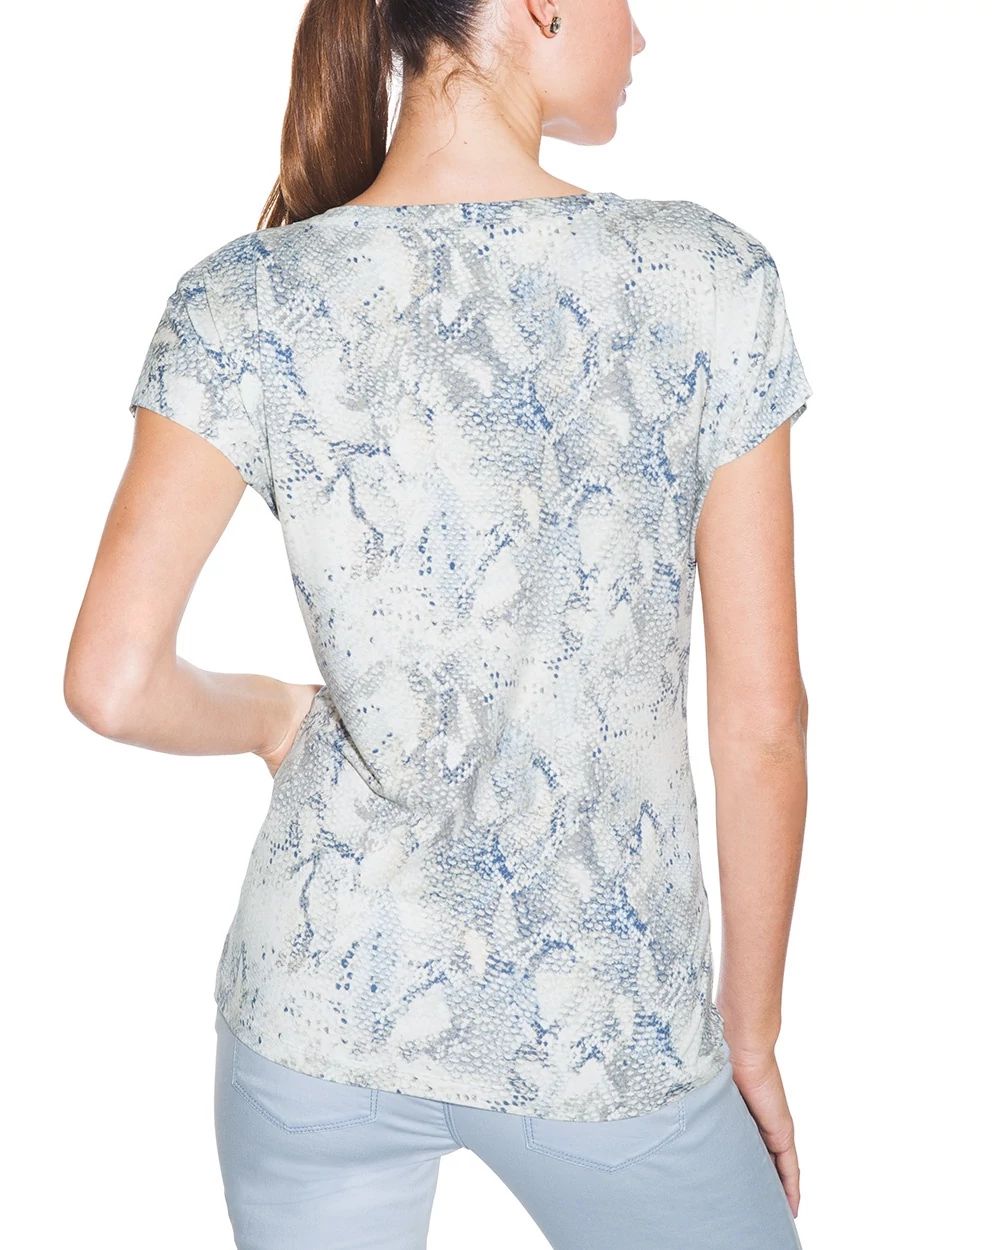 Outlet WHBM Snake-Print Tee click to view larger image.